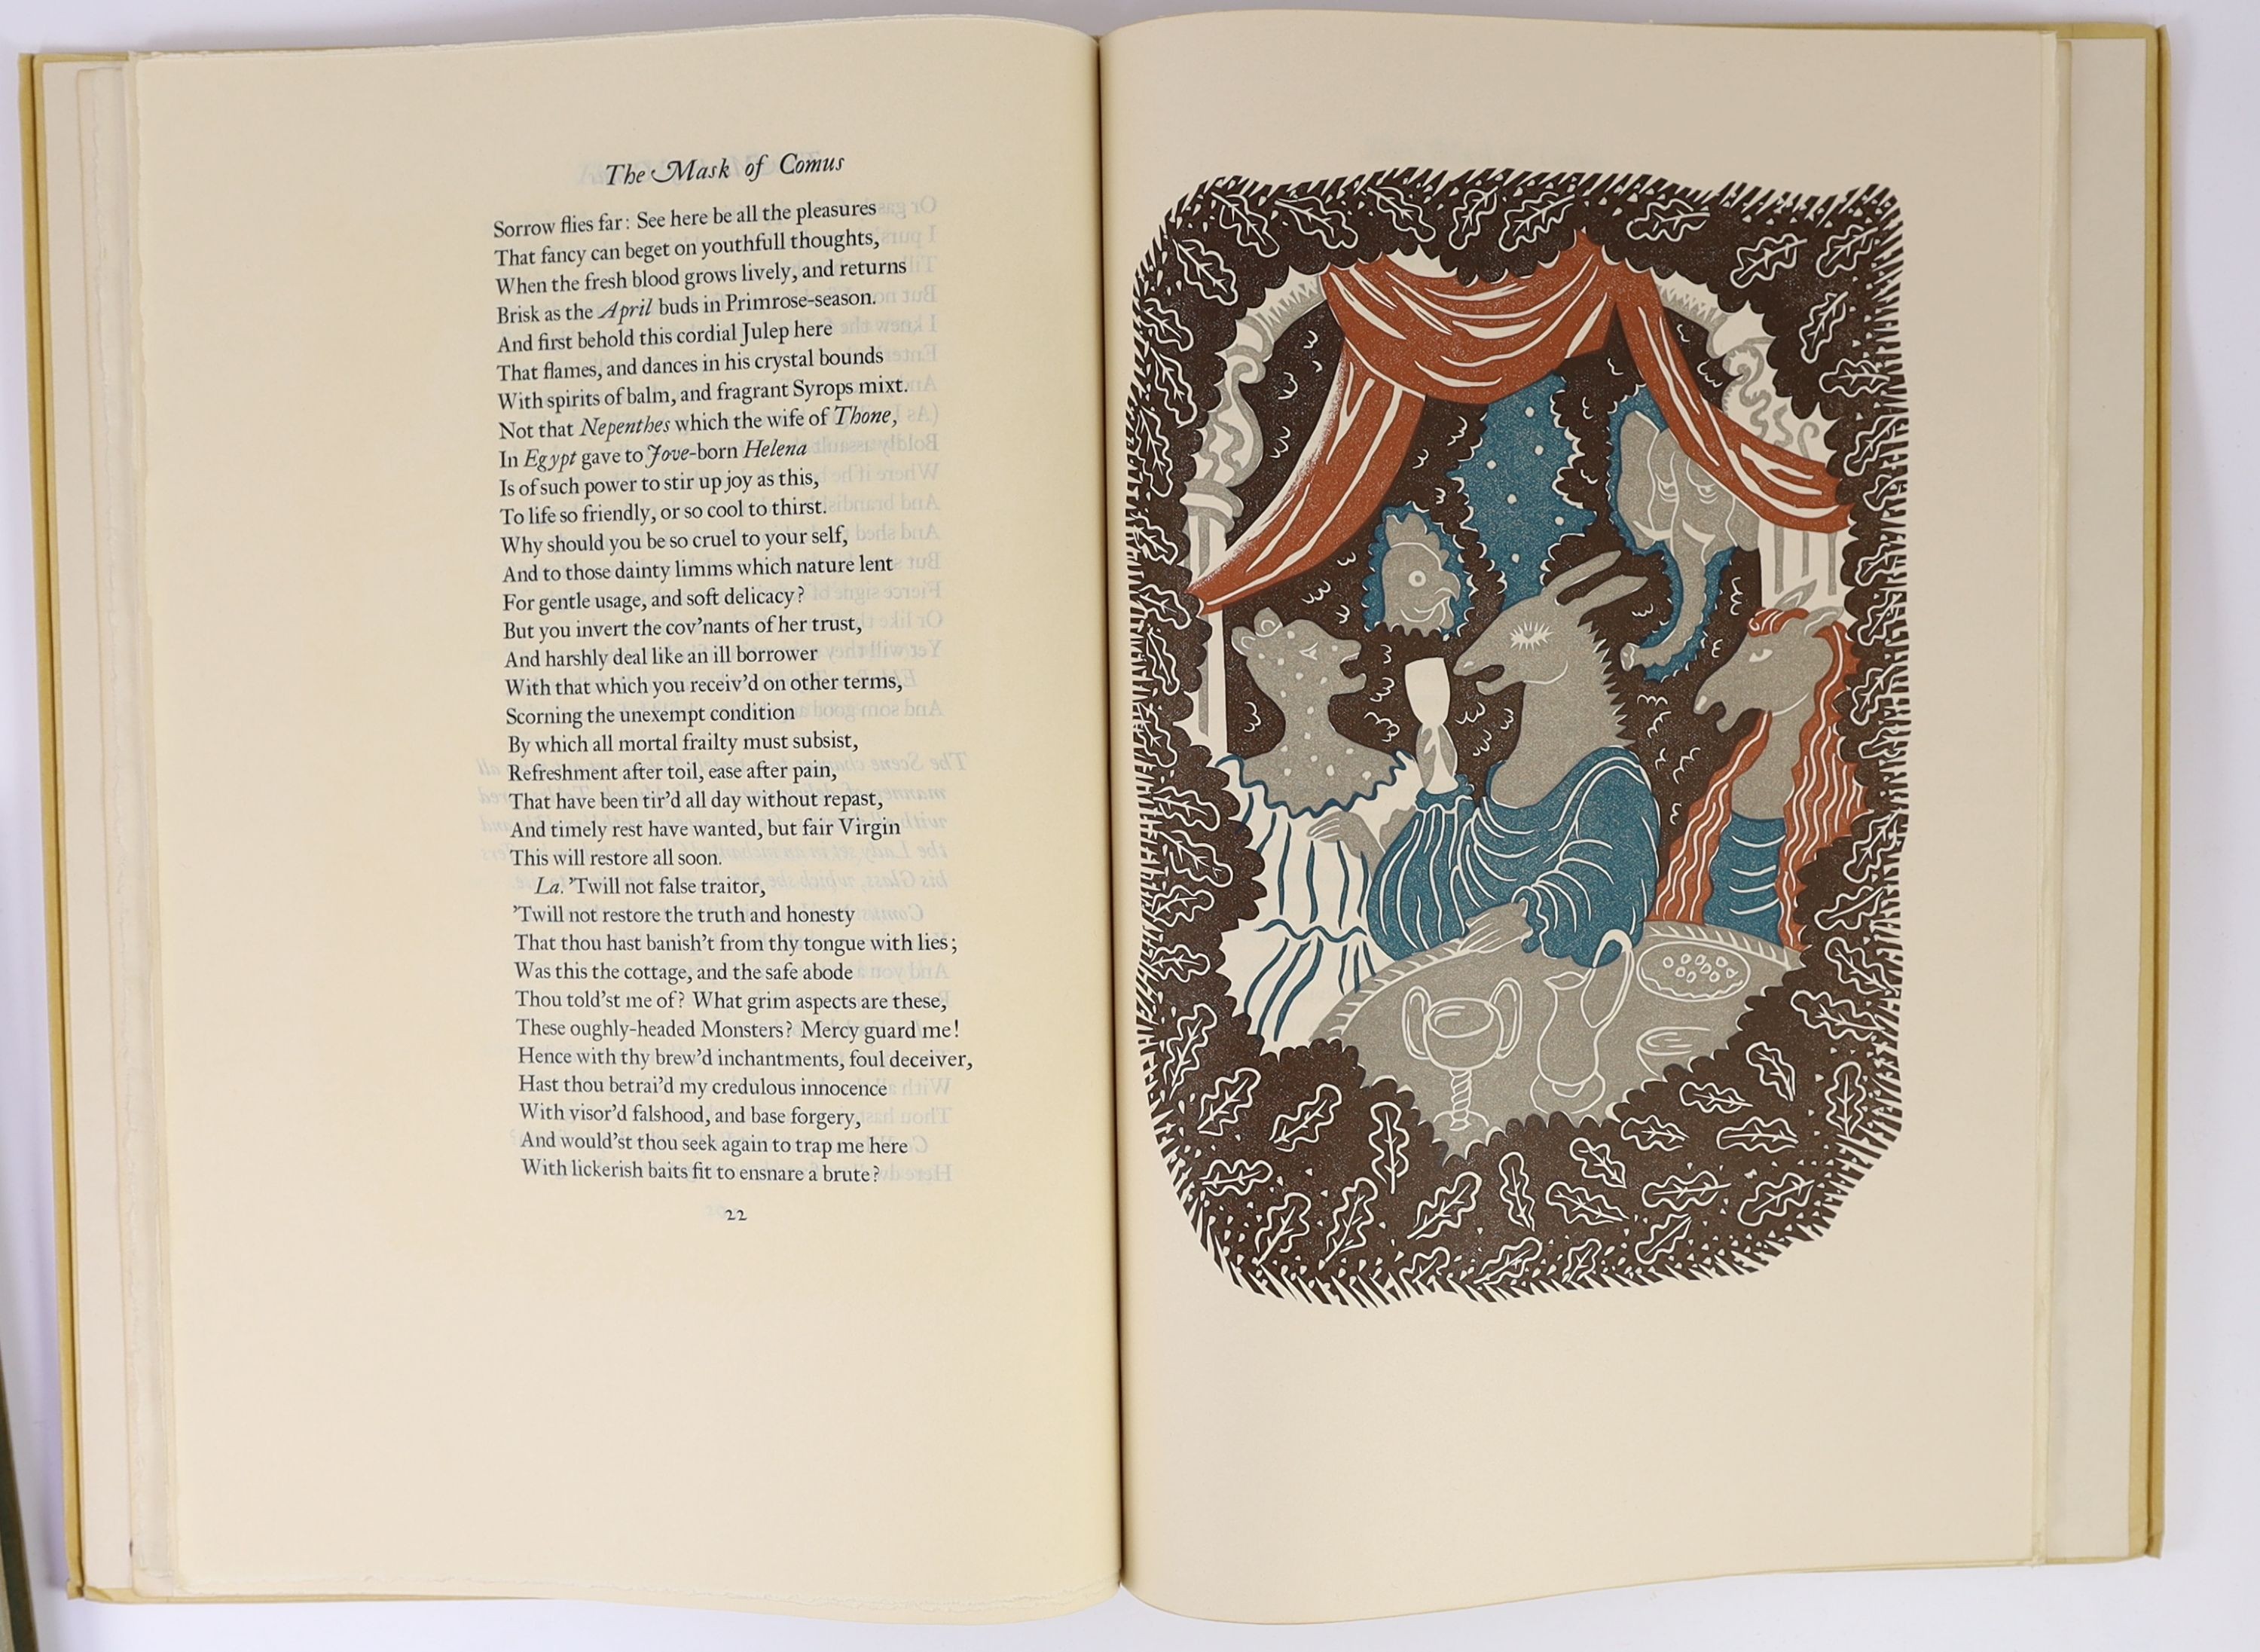 Nonesuch Press - Milton, John - The Mask of Comus, one of 950, folio, faux vellum with yapped edges, illustrated with 5 plates by M.R.H. Farrar, London, 1937, in slip case.